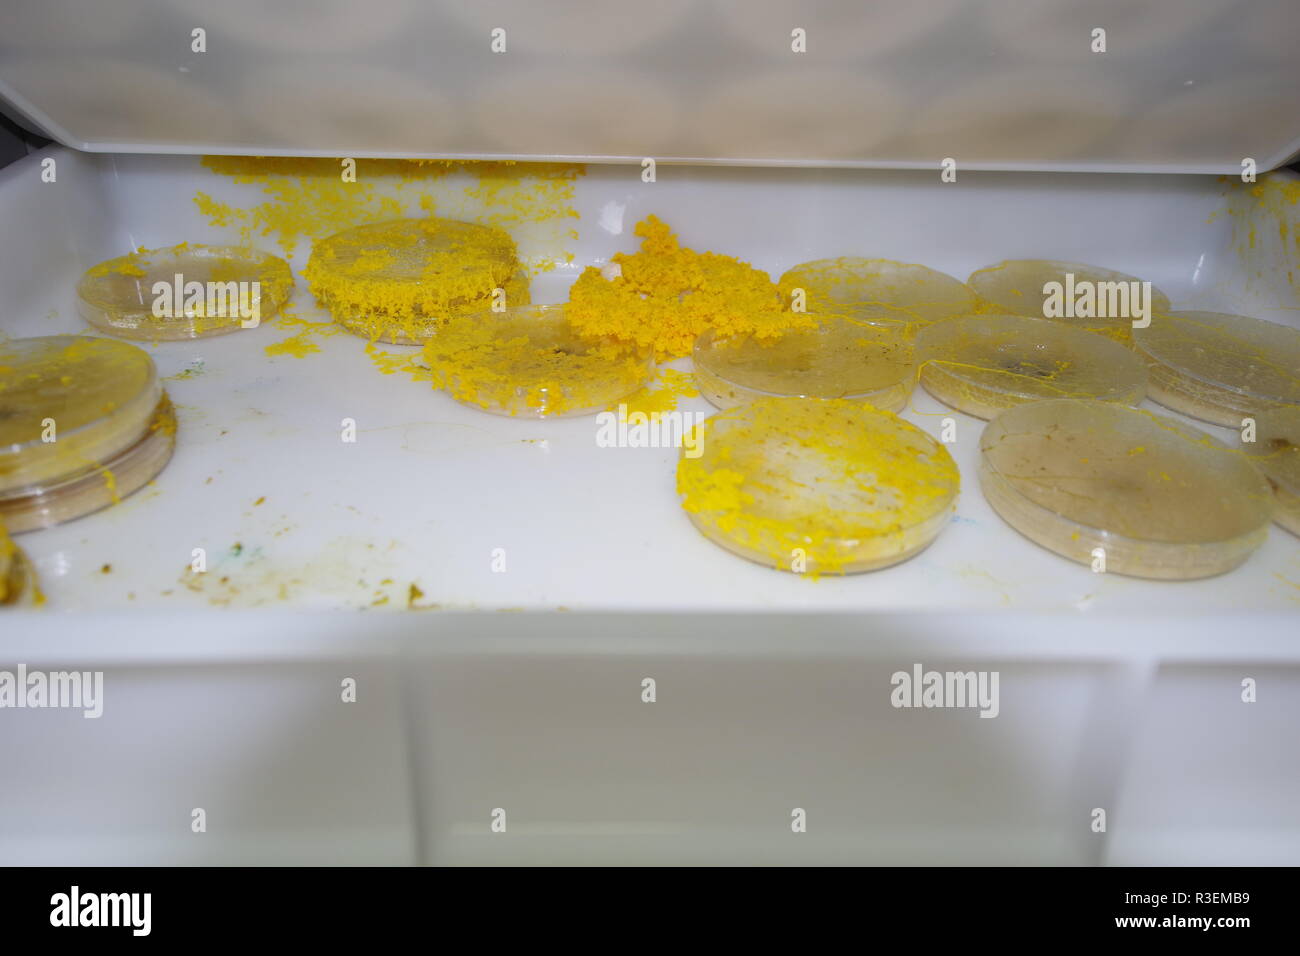 Yellow Slime Mould (Physarum polycephalum) Growing and Network Forming in Agar Petri Dish. Biology Laboratory Project, Scotland, UK. Stock Photo